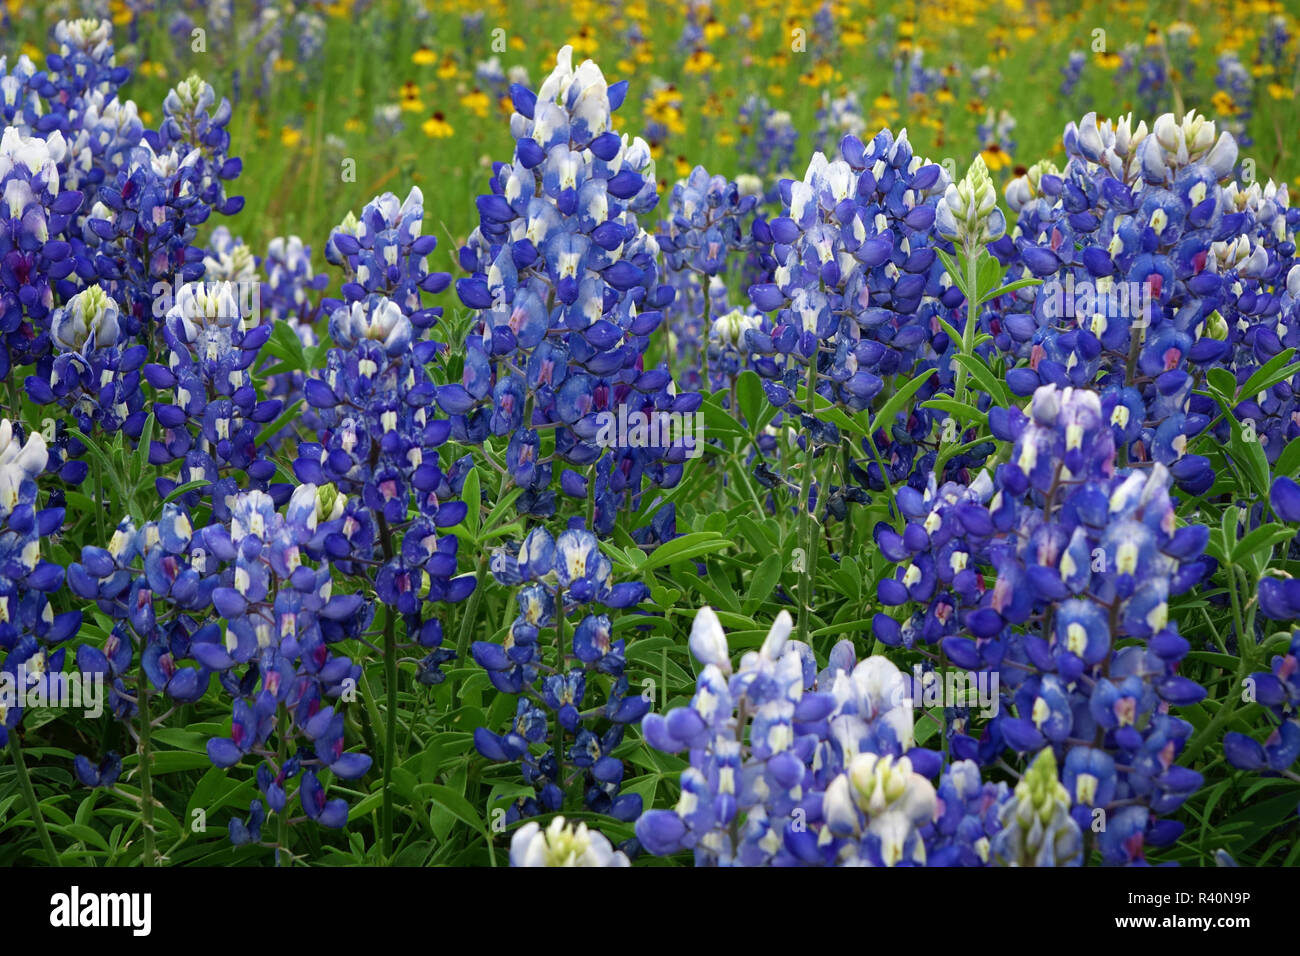 Texas Hill Country wildflowers, along the 16-mile Willow City Loop between Fredericksburg and Llano, Texas. Bluebonnets Stock Photo